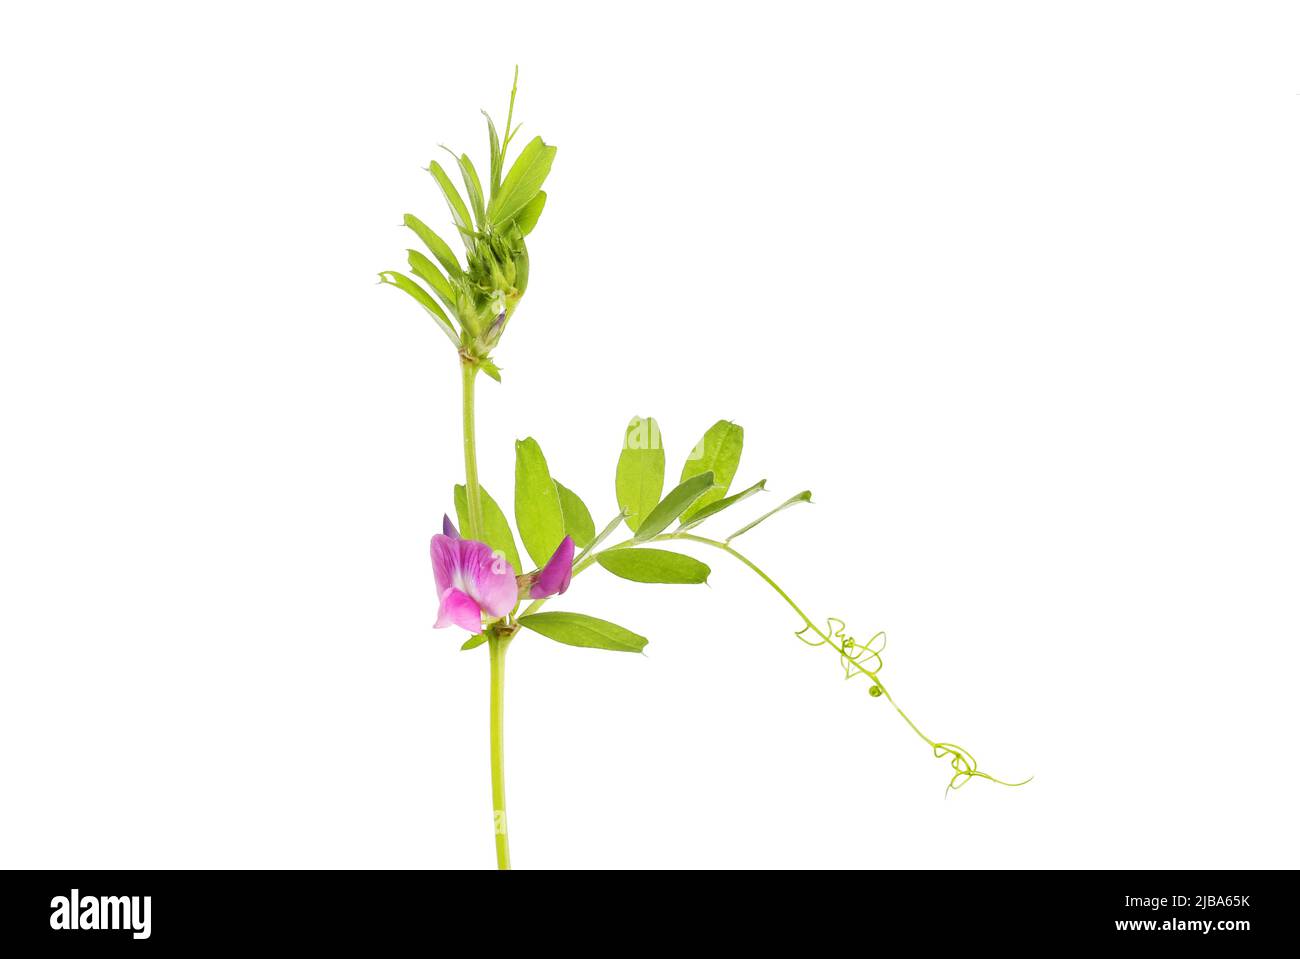 Common vetch, Vicia sativa, flower and foliage isolated against white Stock Photo